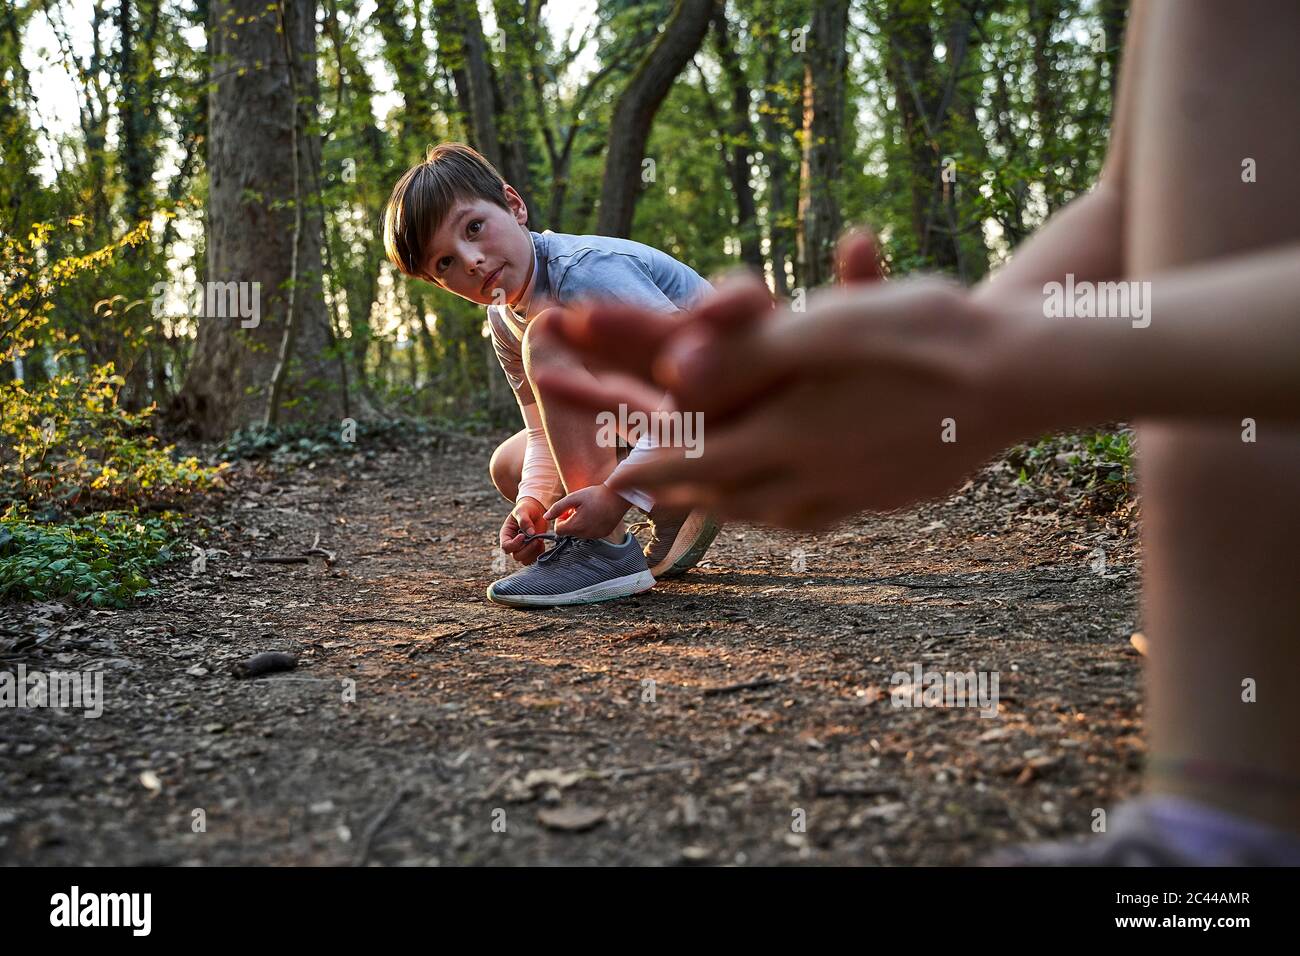 Boy tying his shoelace while looking at sister in forest Stock Photo